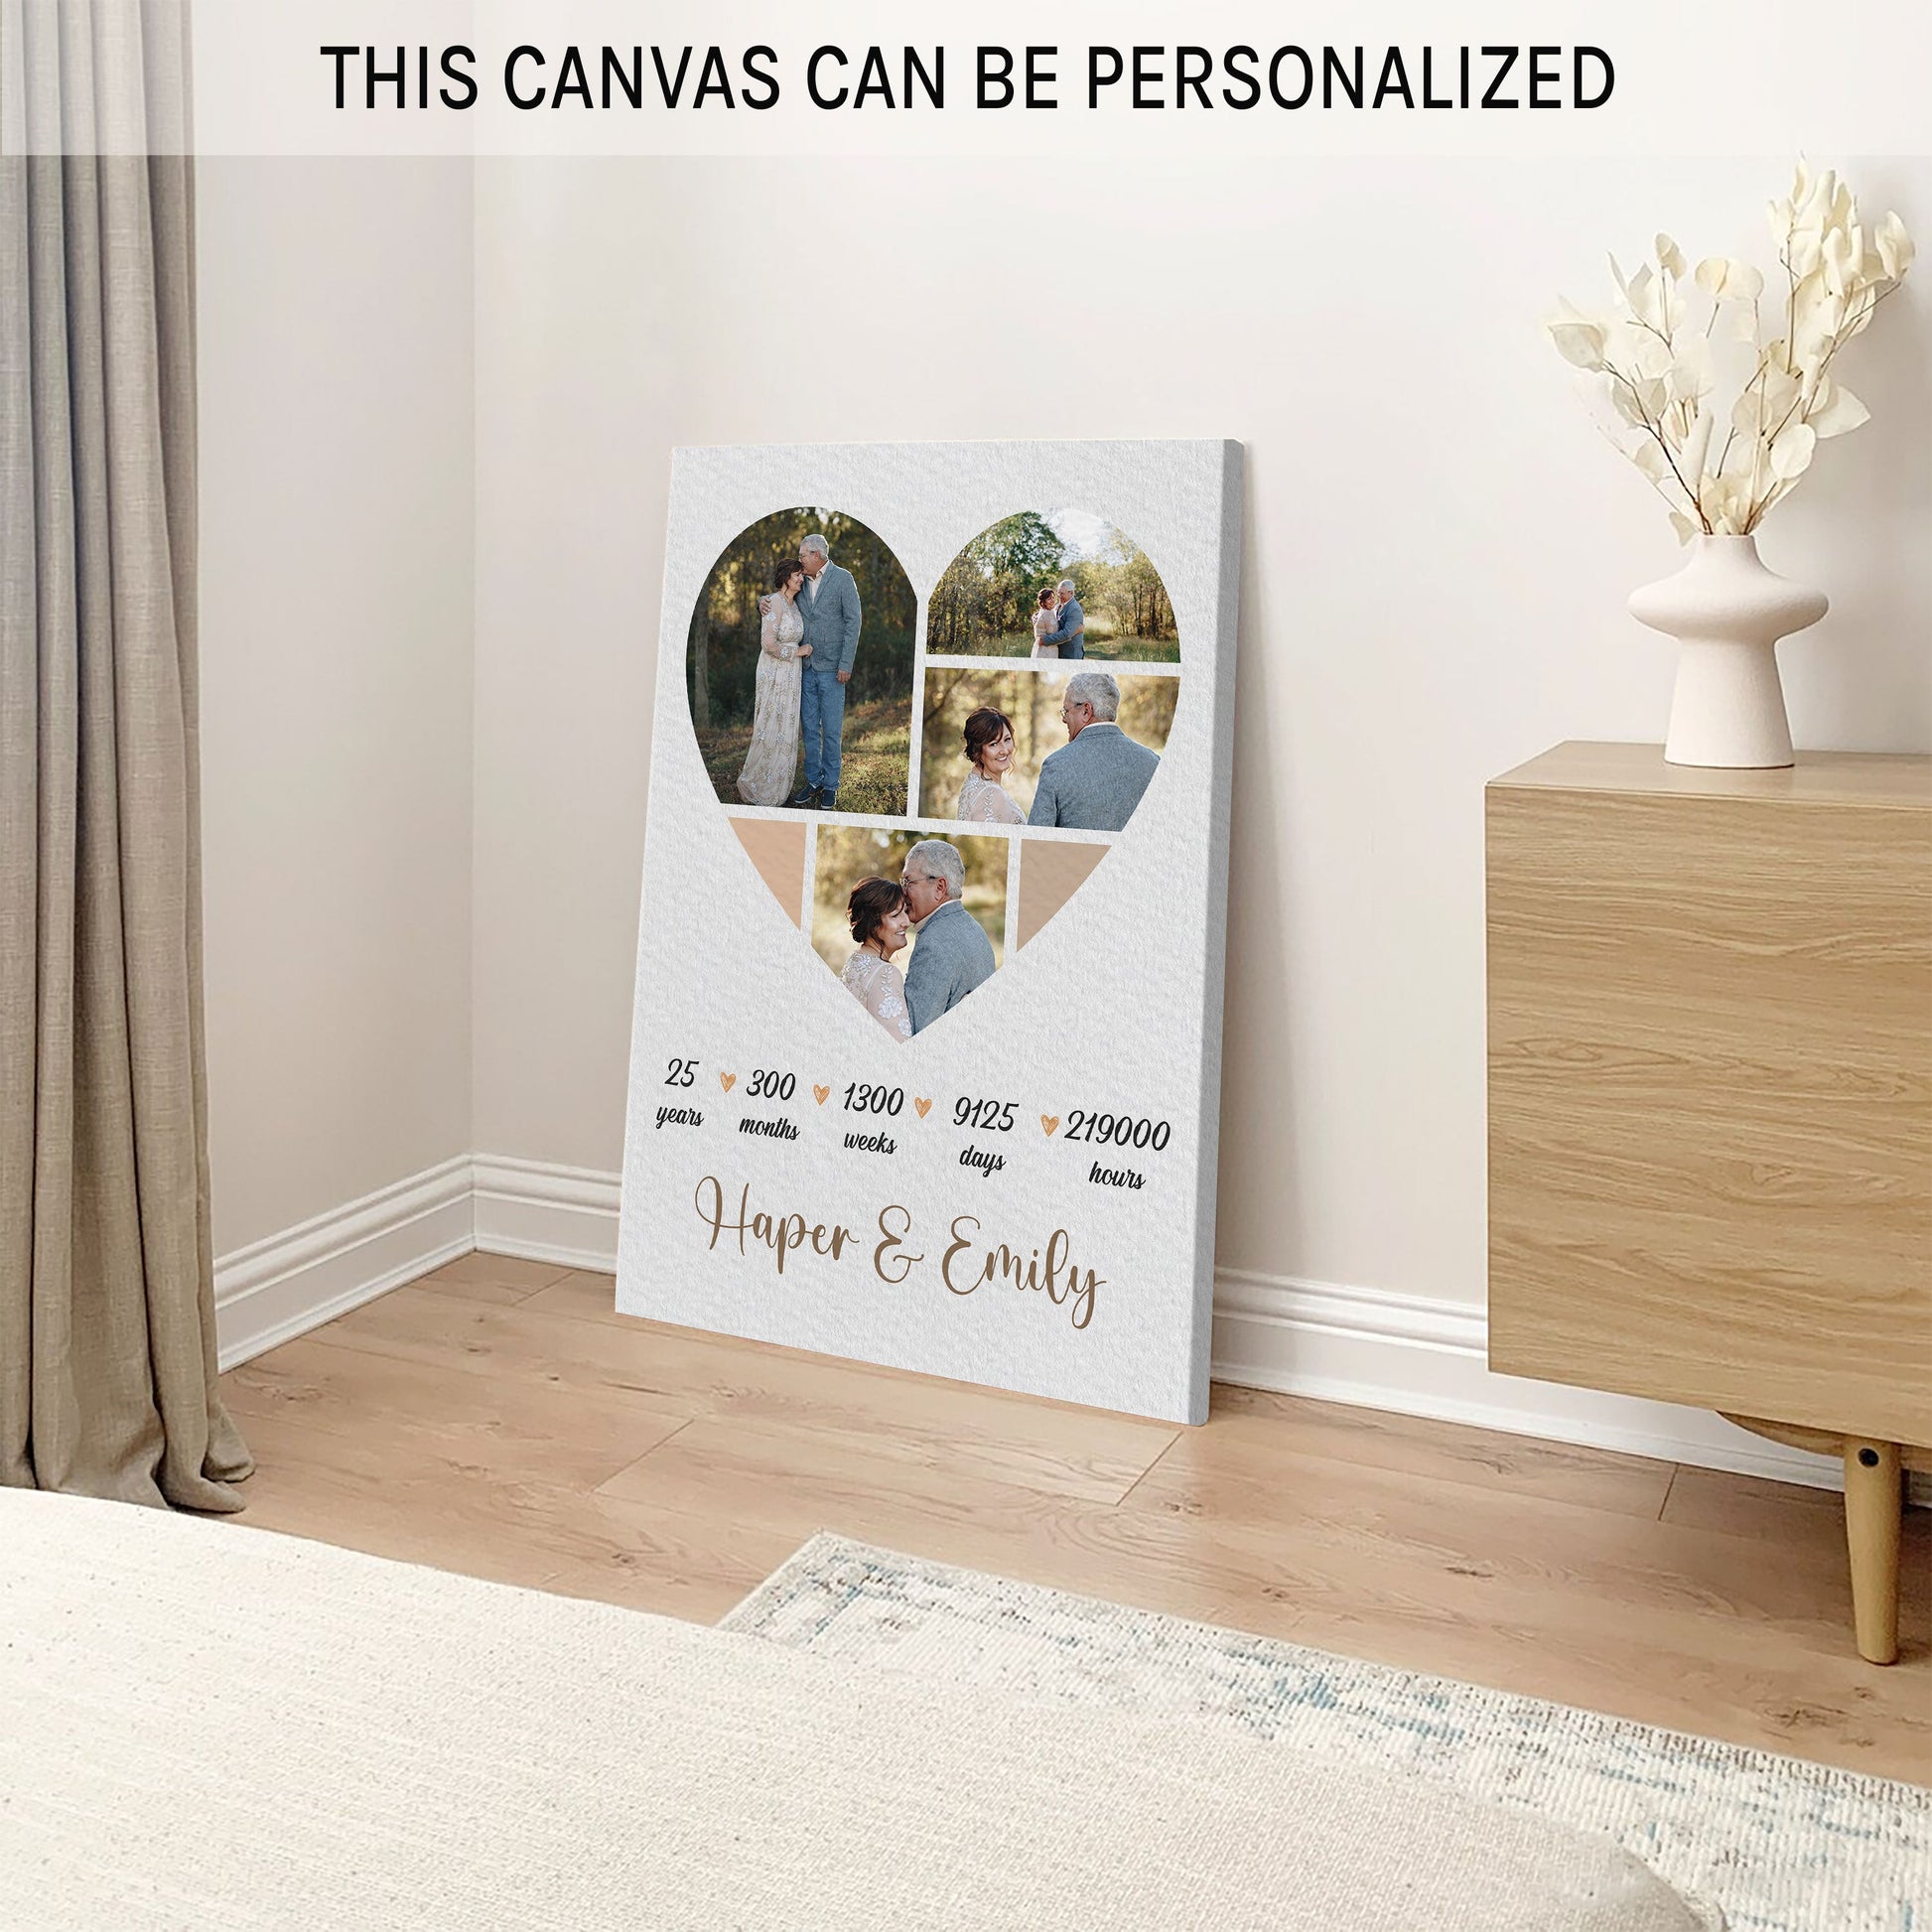 25 Year Anniversary Heart Shaped Photo - Personalized 25 Year Anniversary gift for him for her - Custom Canvas - MyMindfulGifts